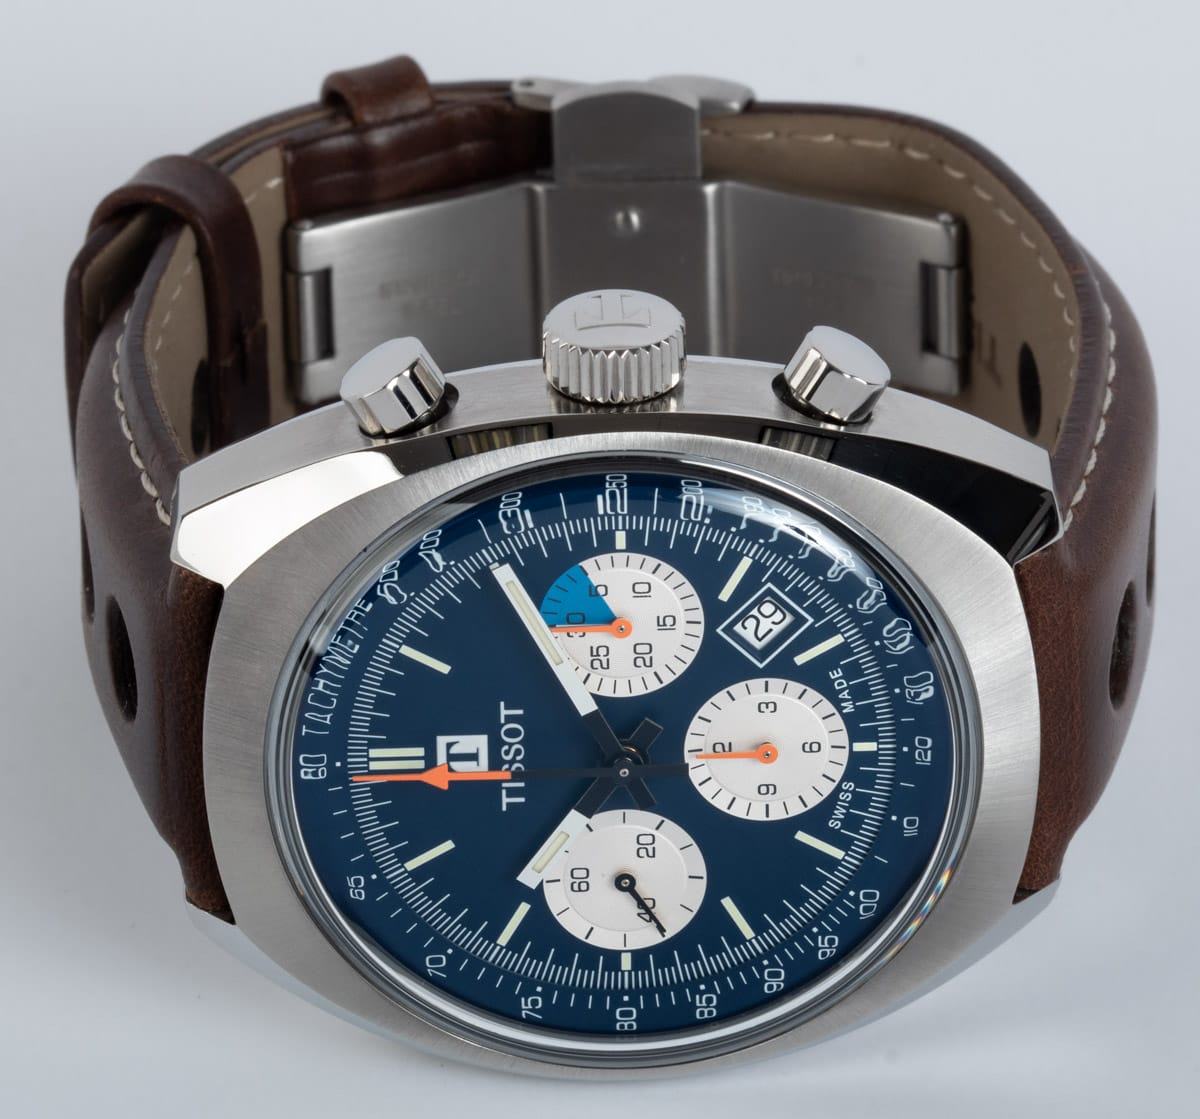 Front View of Heritage 1973 Chronograph